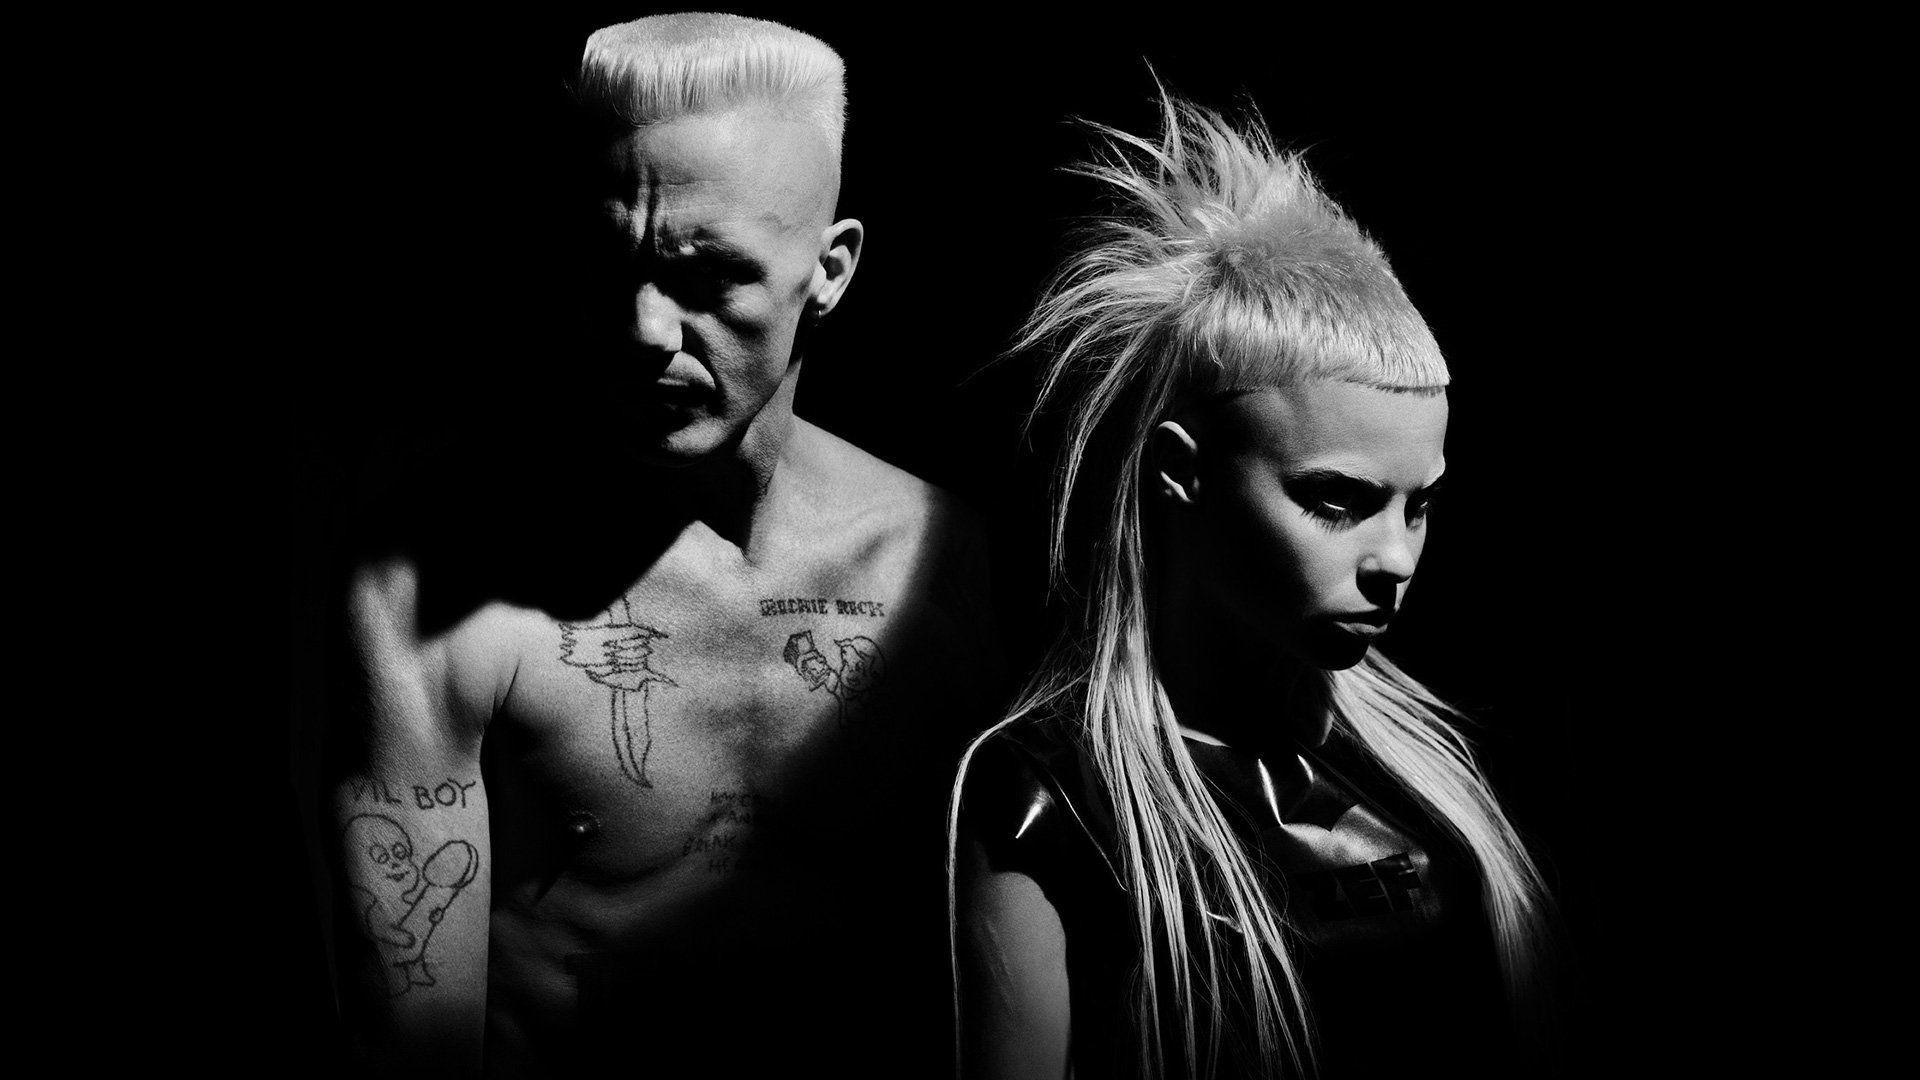 Die Antwoord: A brash, controversy-courting hip-hop and electronic group from Cape Town, South Africa. 1920x1080 Full HD Background.